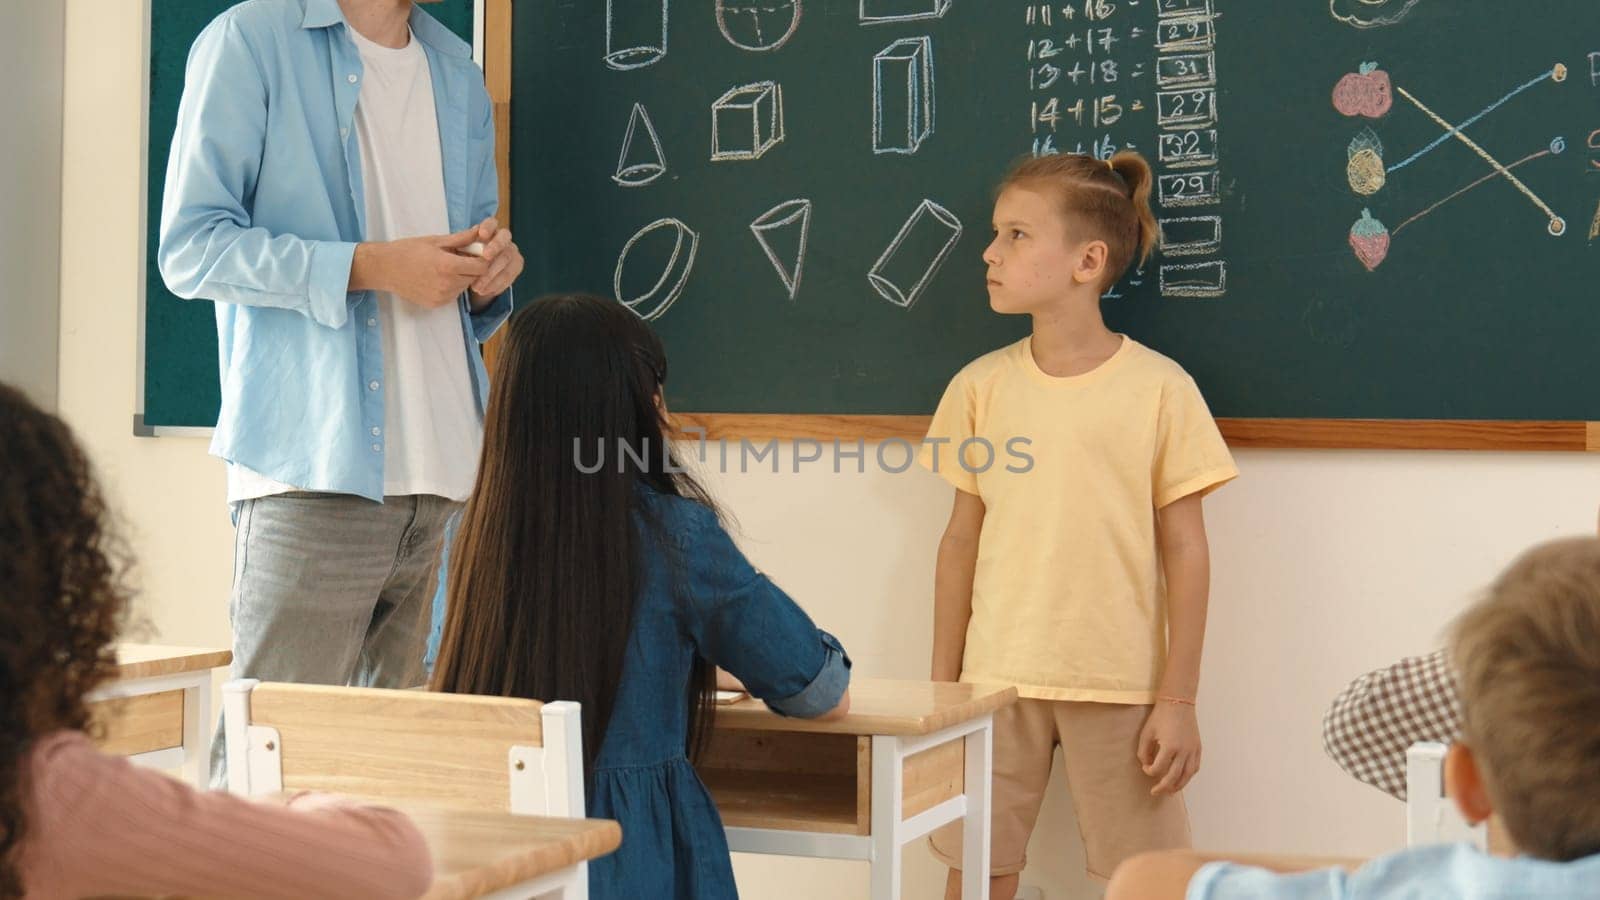 Professional teacher talking and explain idea to asian child during class. Caucasian student listening instructor while standing in front of classroom with blackboard math lesson written. Pedagogy.